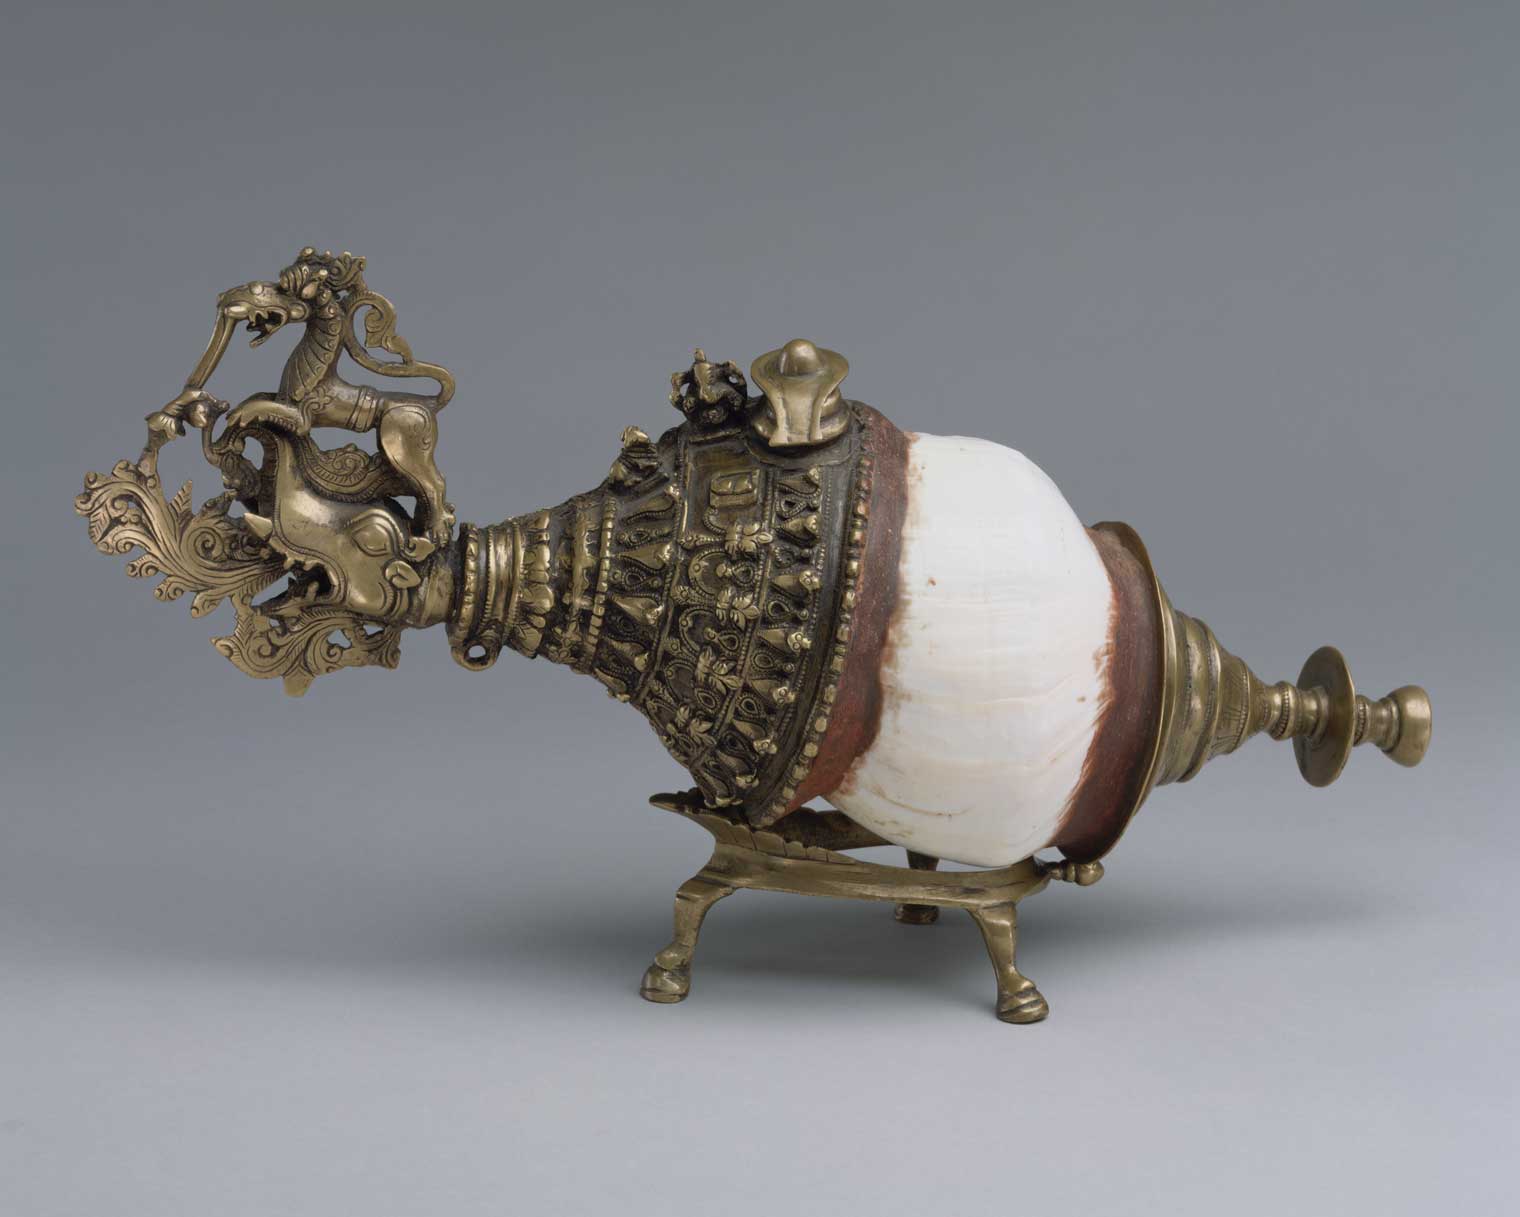 A conch shell with elaborate brass decoration on both sides and brass legs